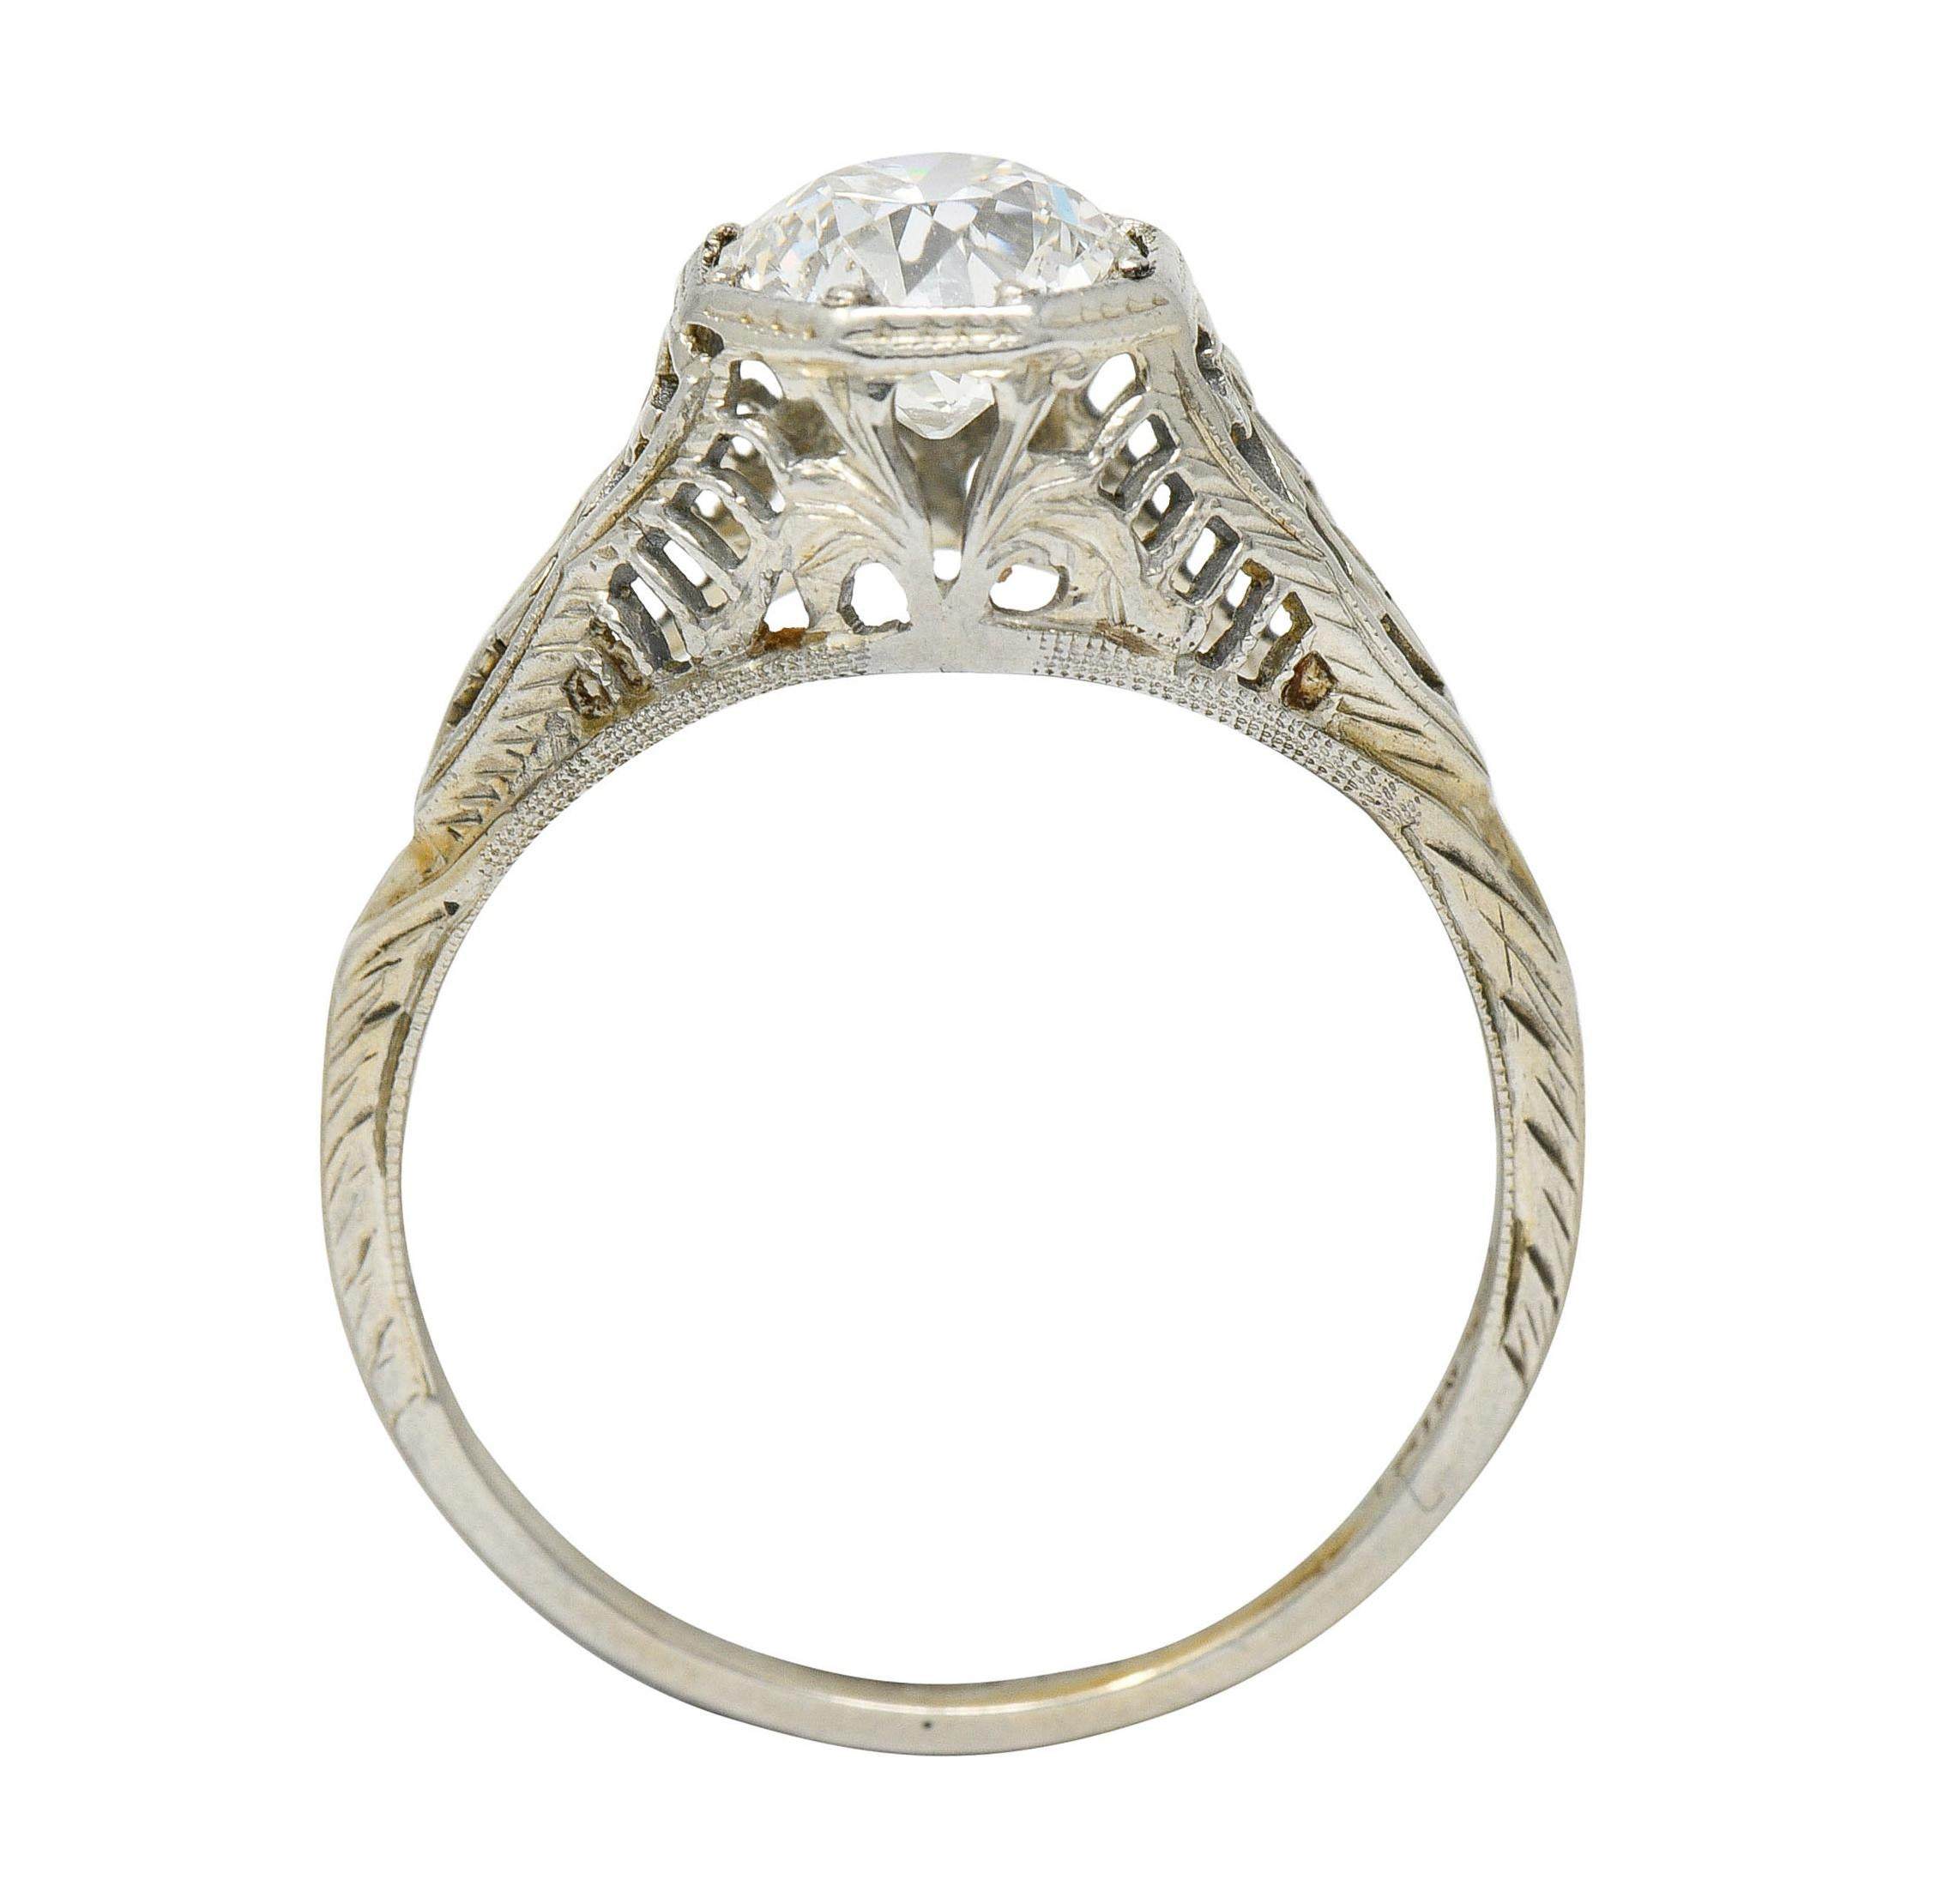 Edwardian 1.02 Carats Diamond 18 Karat White Gold Foliate Engagement Ring Ging In Excellent Condition For Sale In Philadelphia, PA